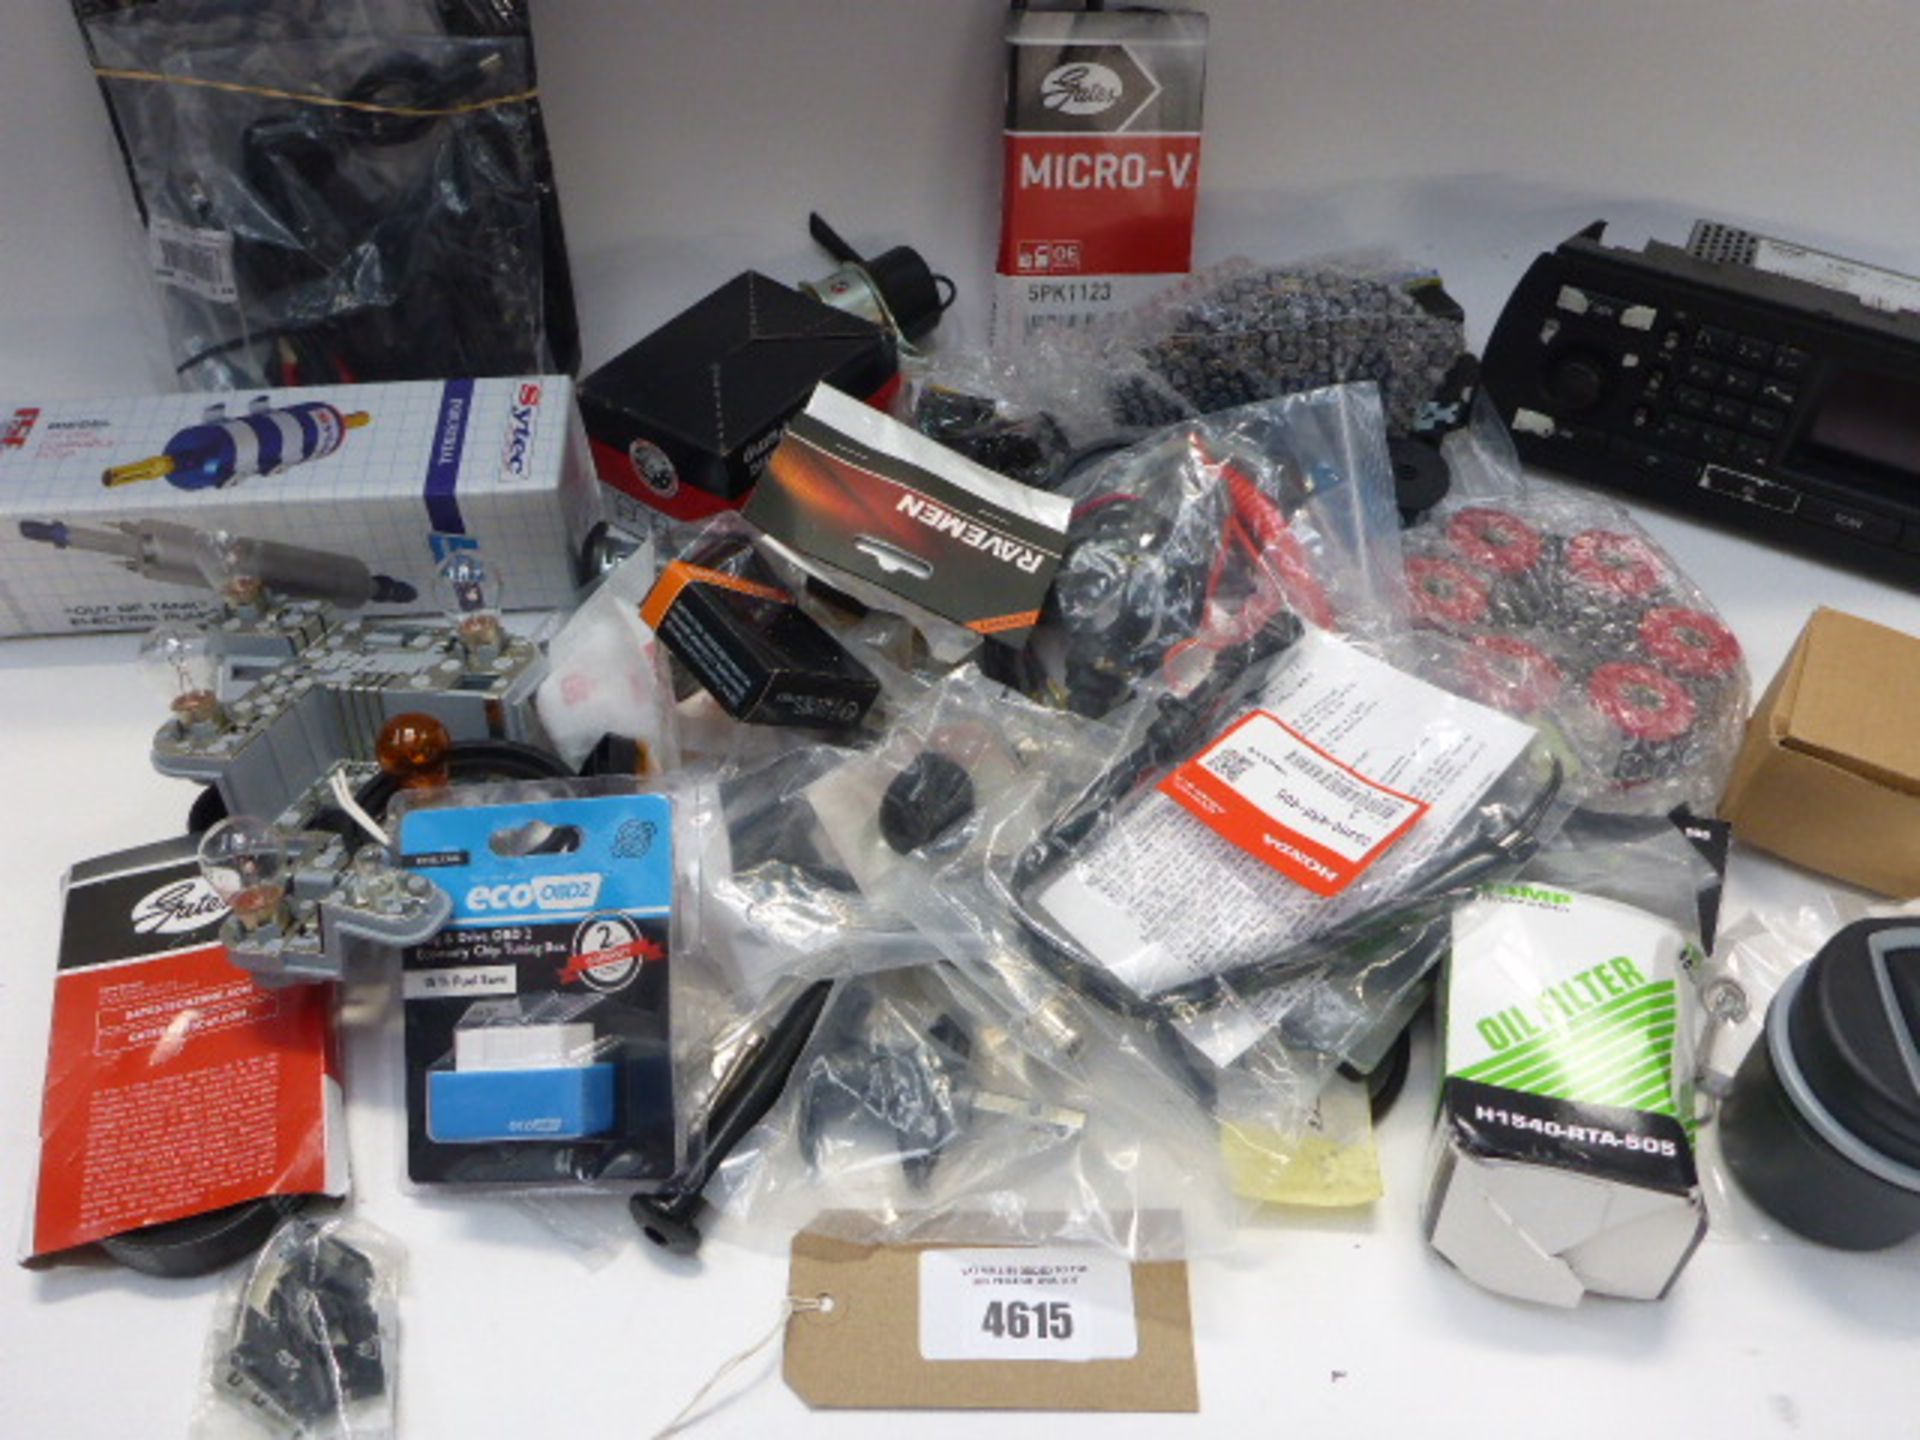 Bag containing car parts and accessories including oil filters, Saab radio, belts, diesel filter,